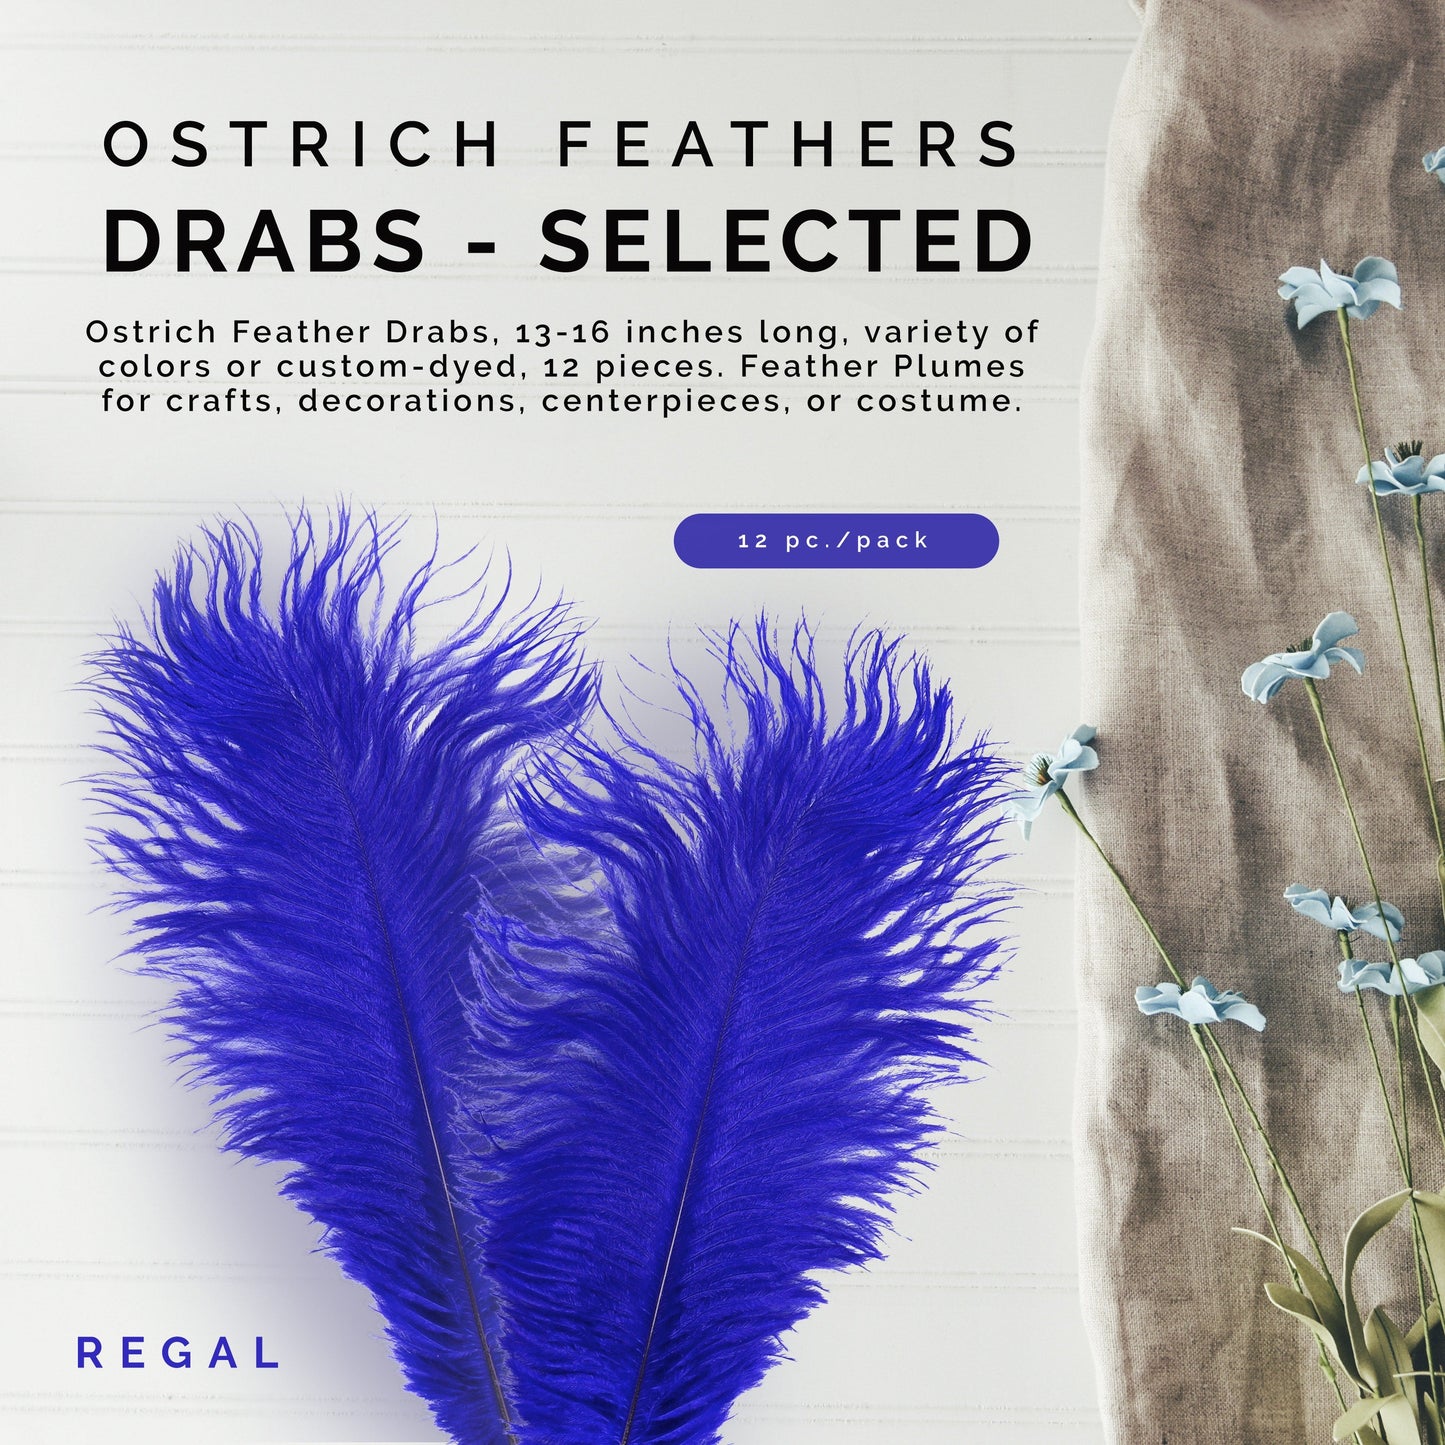 Ostrich Feathers 13-16" Drabs - Regal